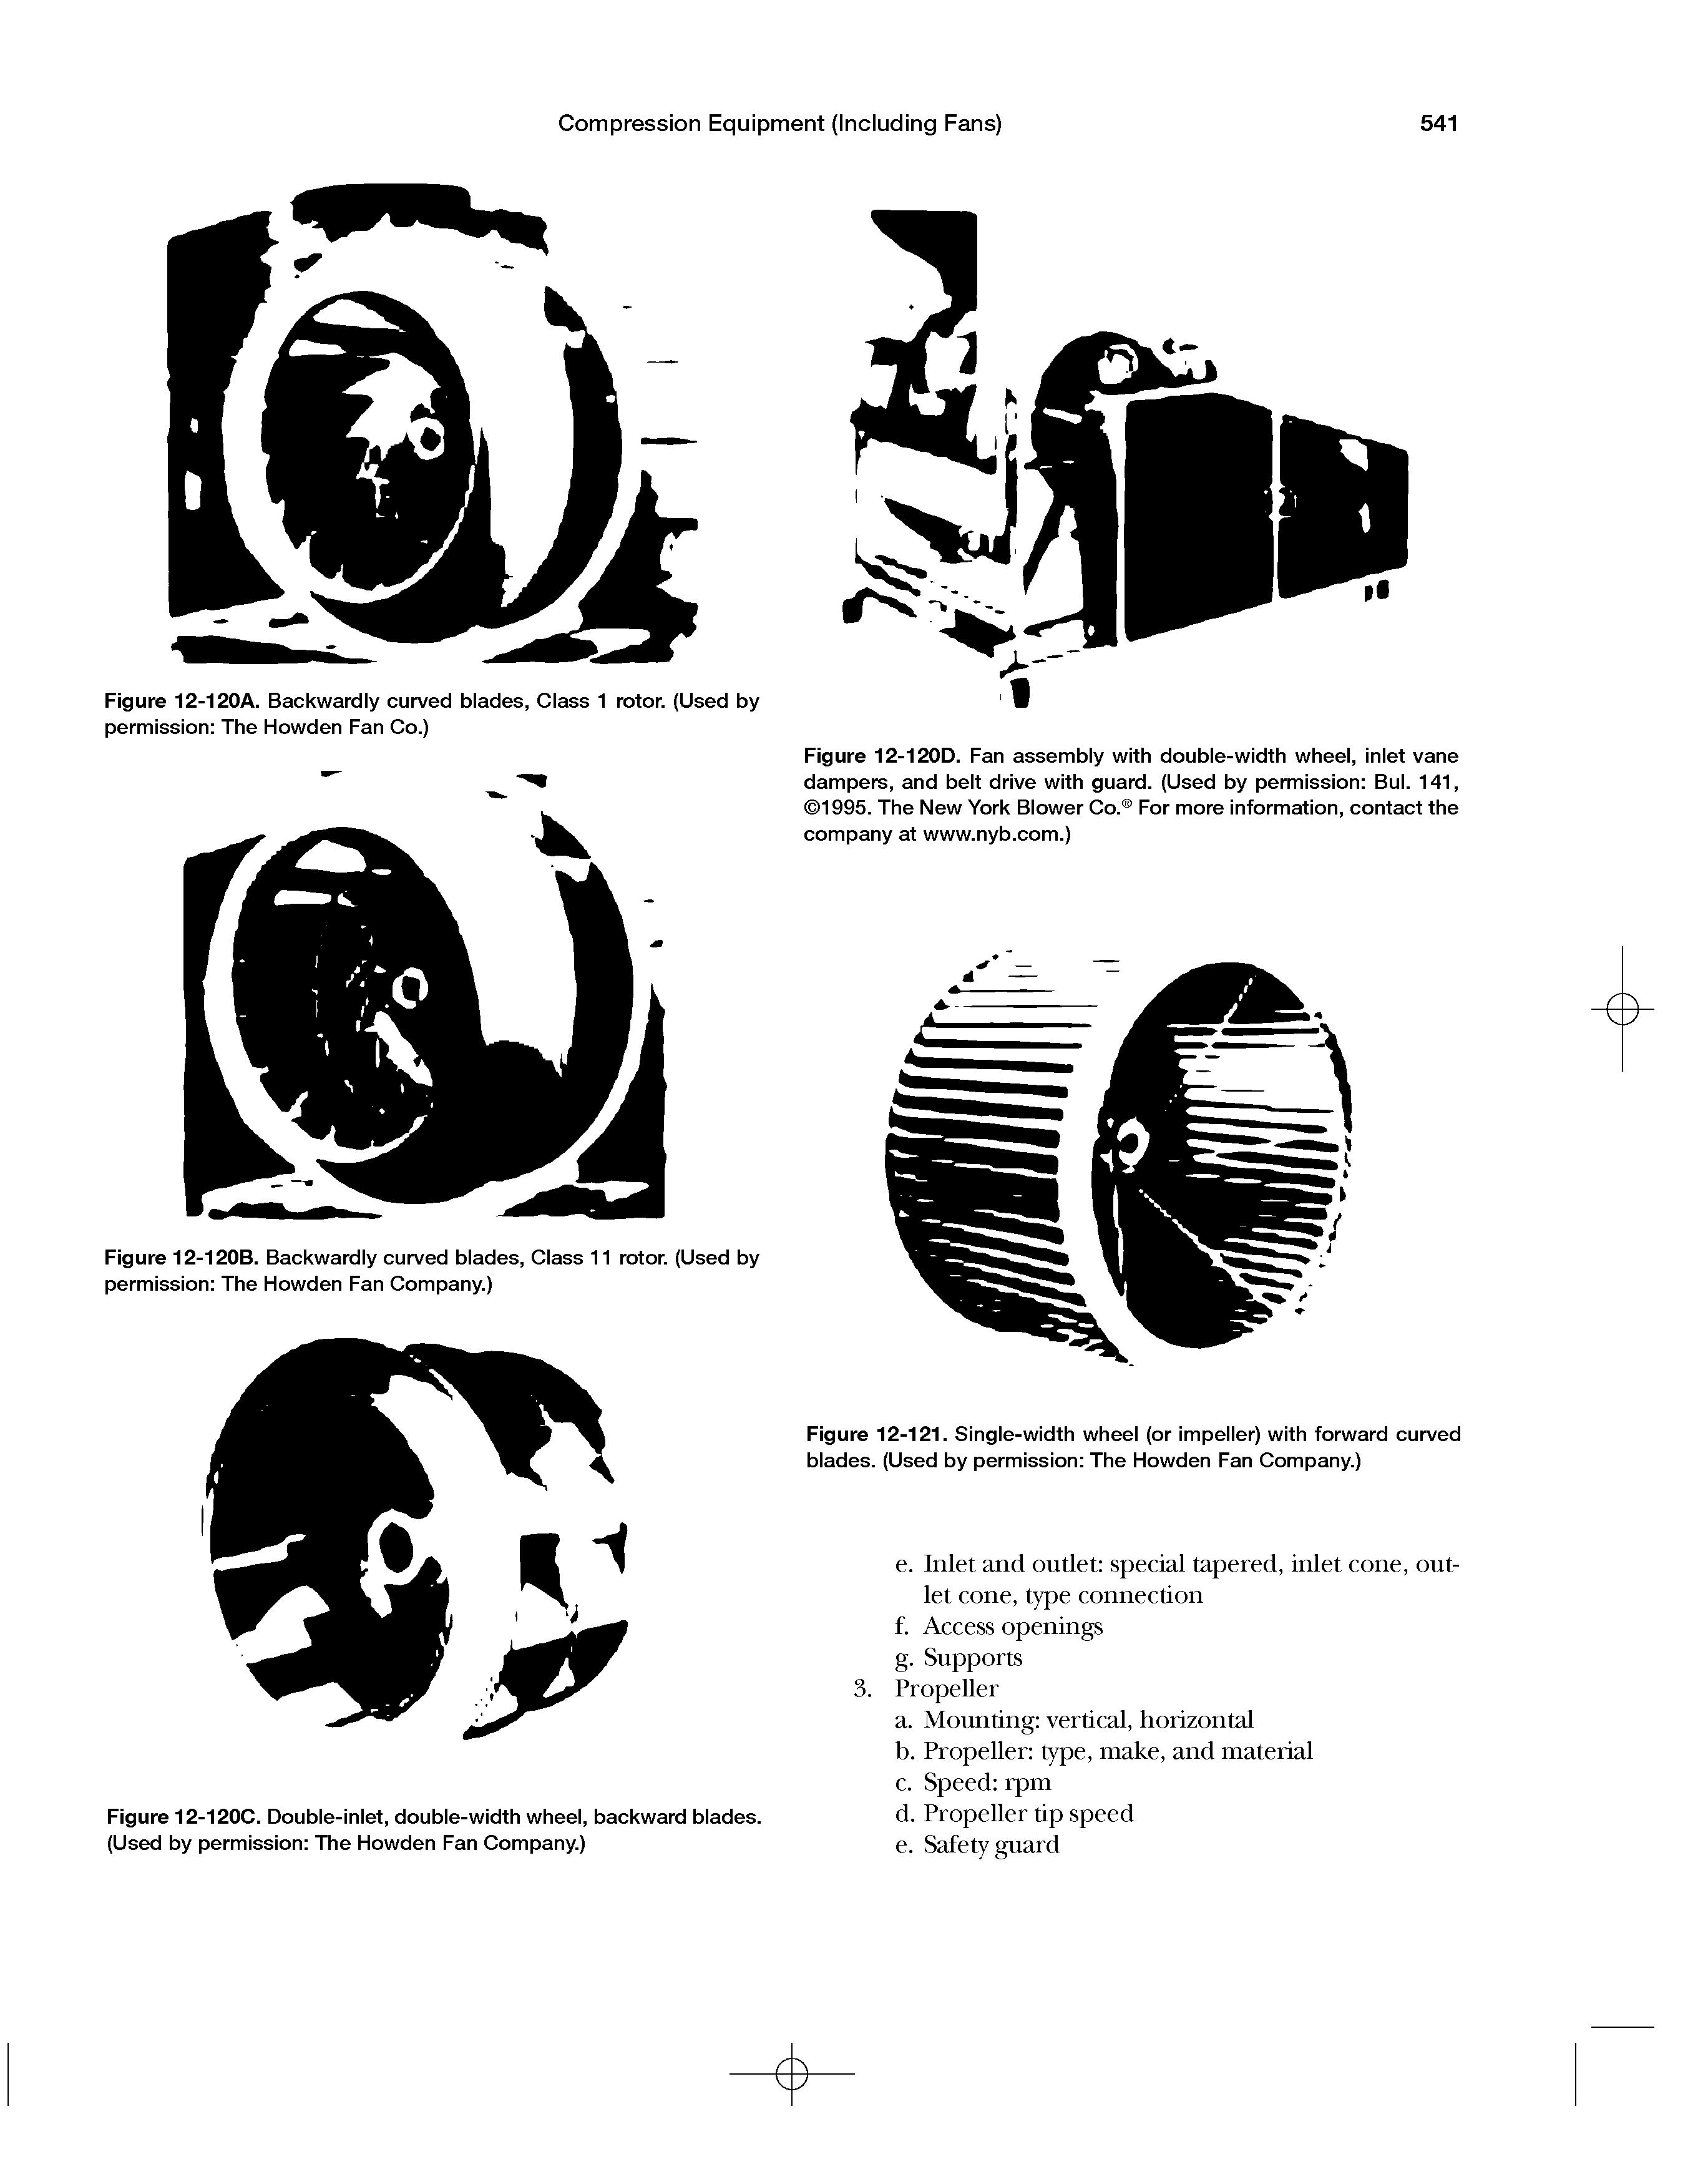 Figure 12-120D. Fan assembly with double-width wheel, inlet vane dampers, and belt drive with guard. (Used by permission Bui. 141, 1995. The New York Blower Co. For more information, contact the company at www.nyb.com.)...